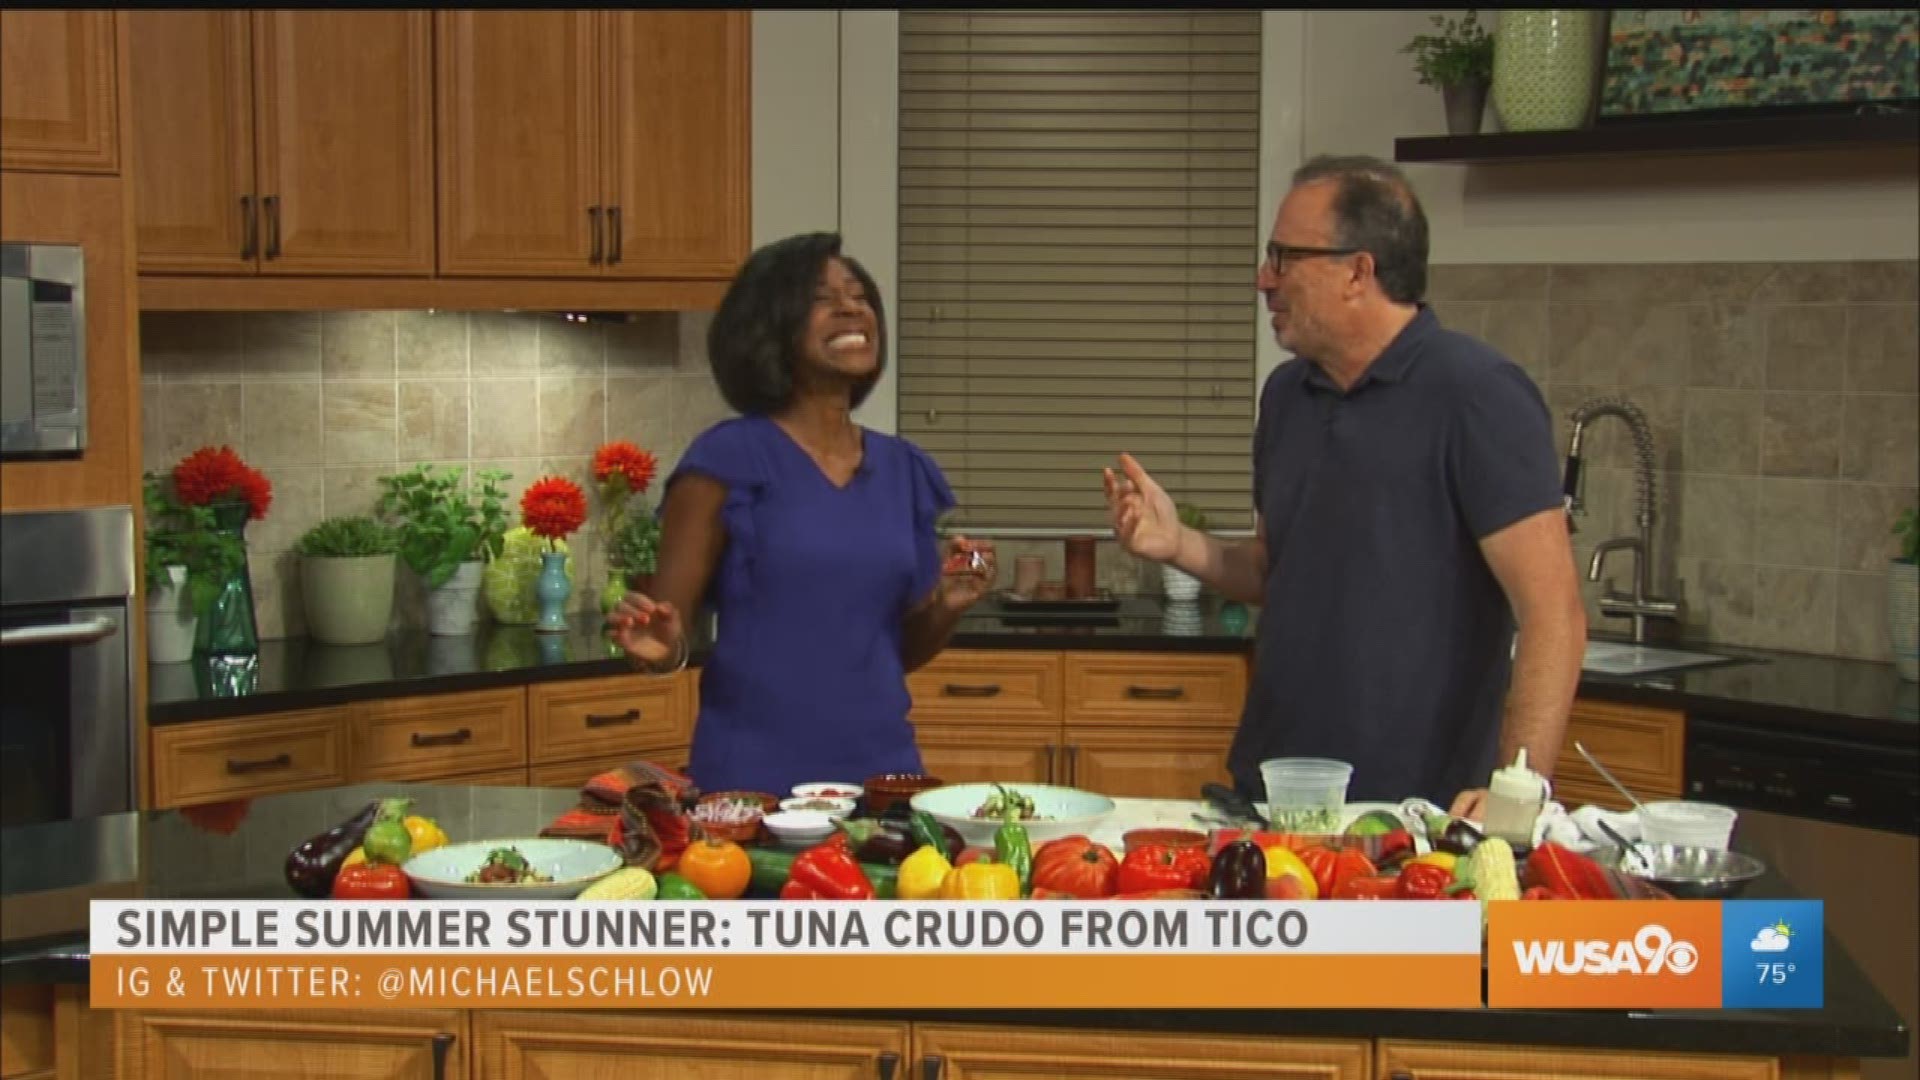 Michael Schlow, a James Beard award-winning chef, has six restaurants in the D.C. Area. He stops by Great Day Washington to talk about his newest restaurant, Prima, in Bethesda, and to show the audience how to make an easy, simple summer stunner – Tuna Crudo.